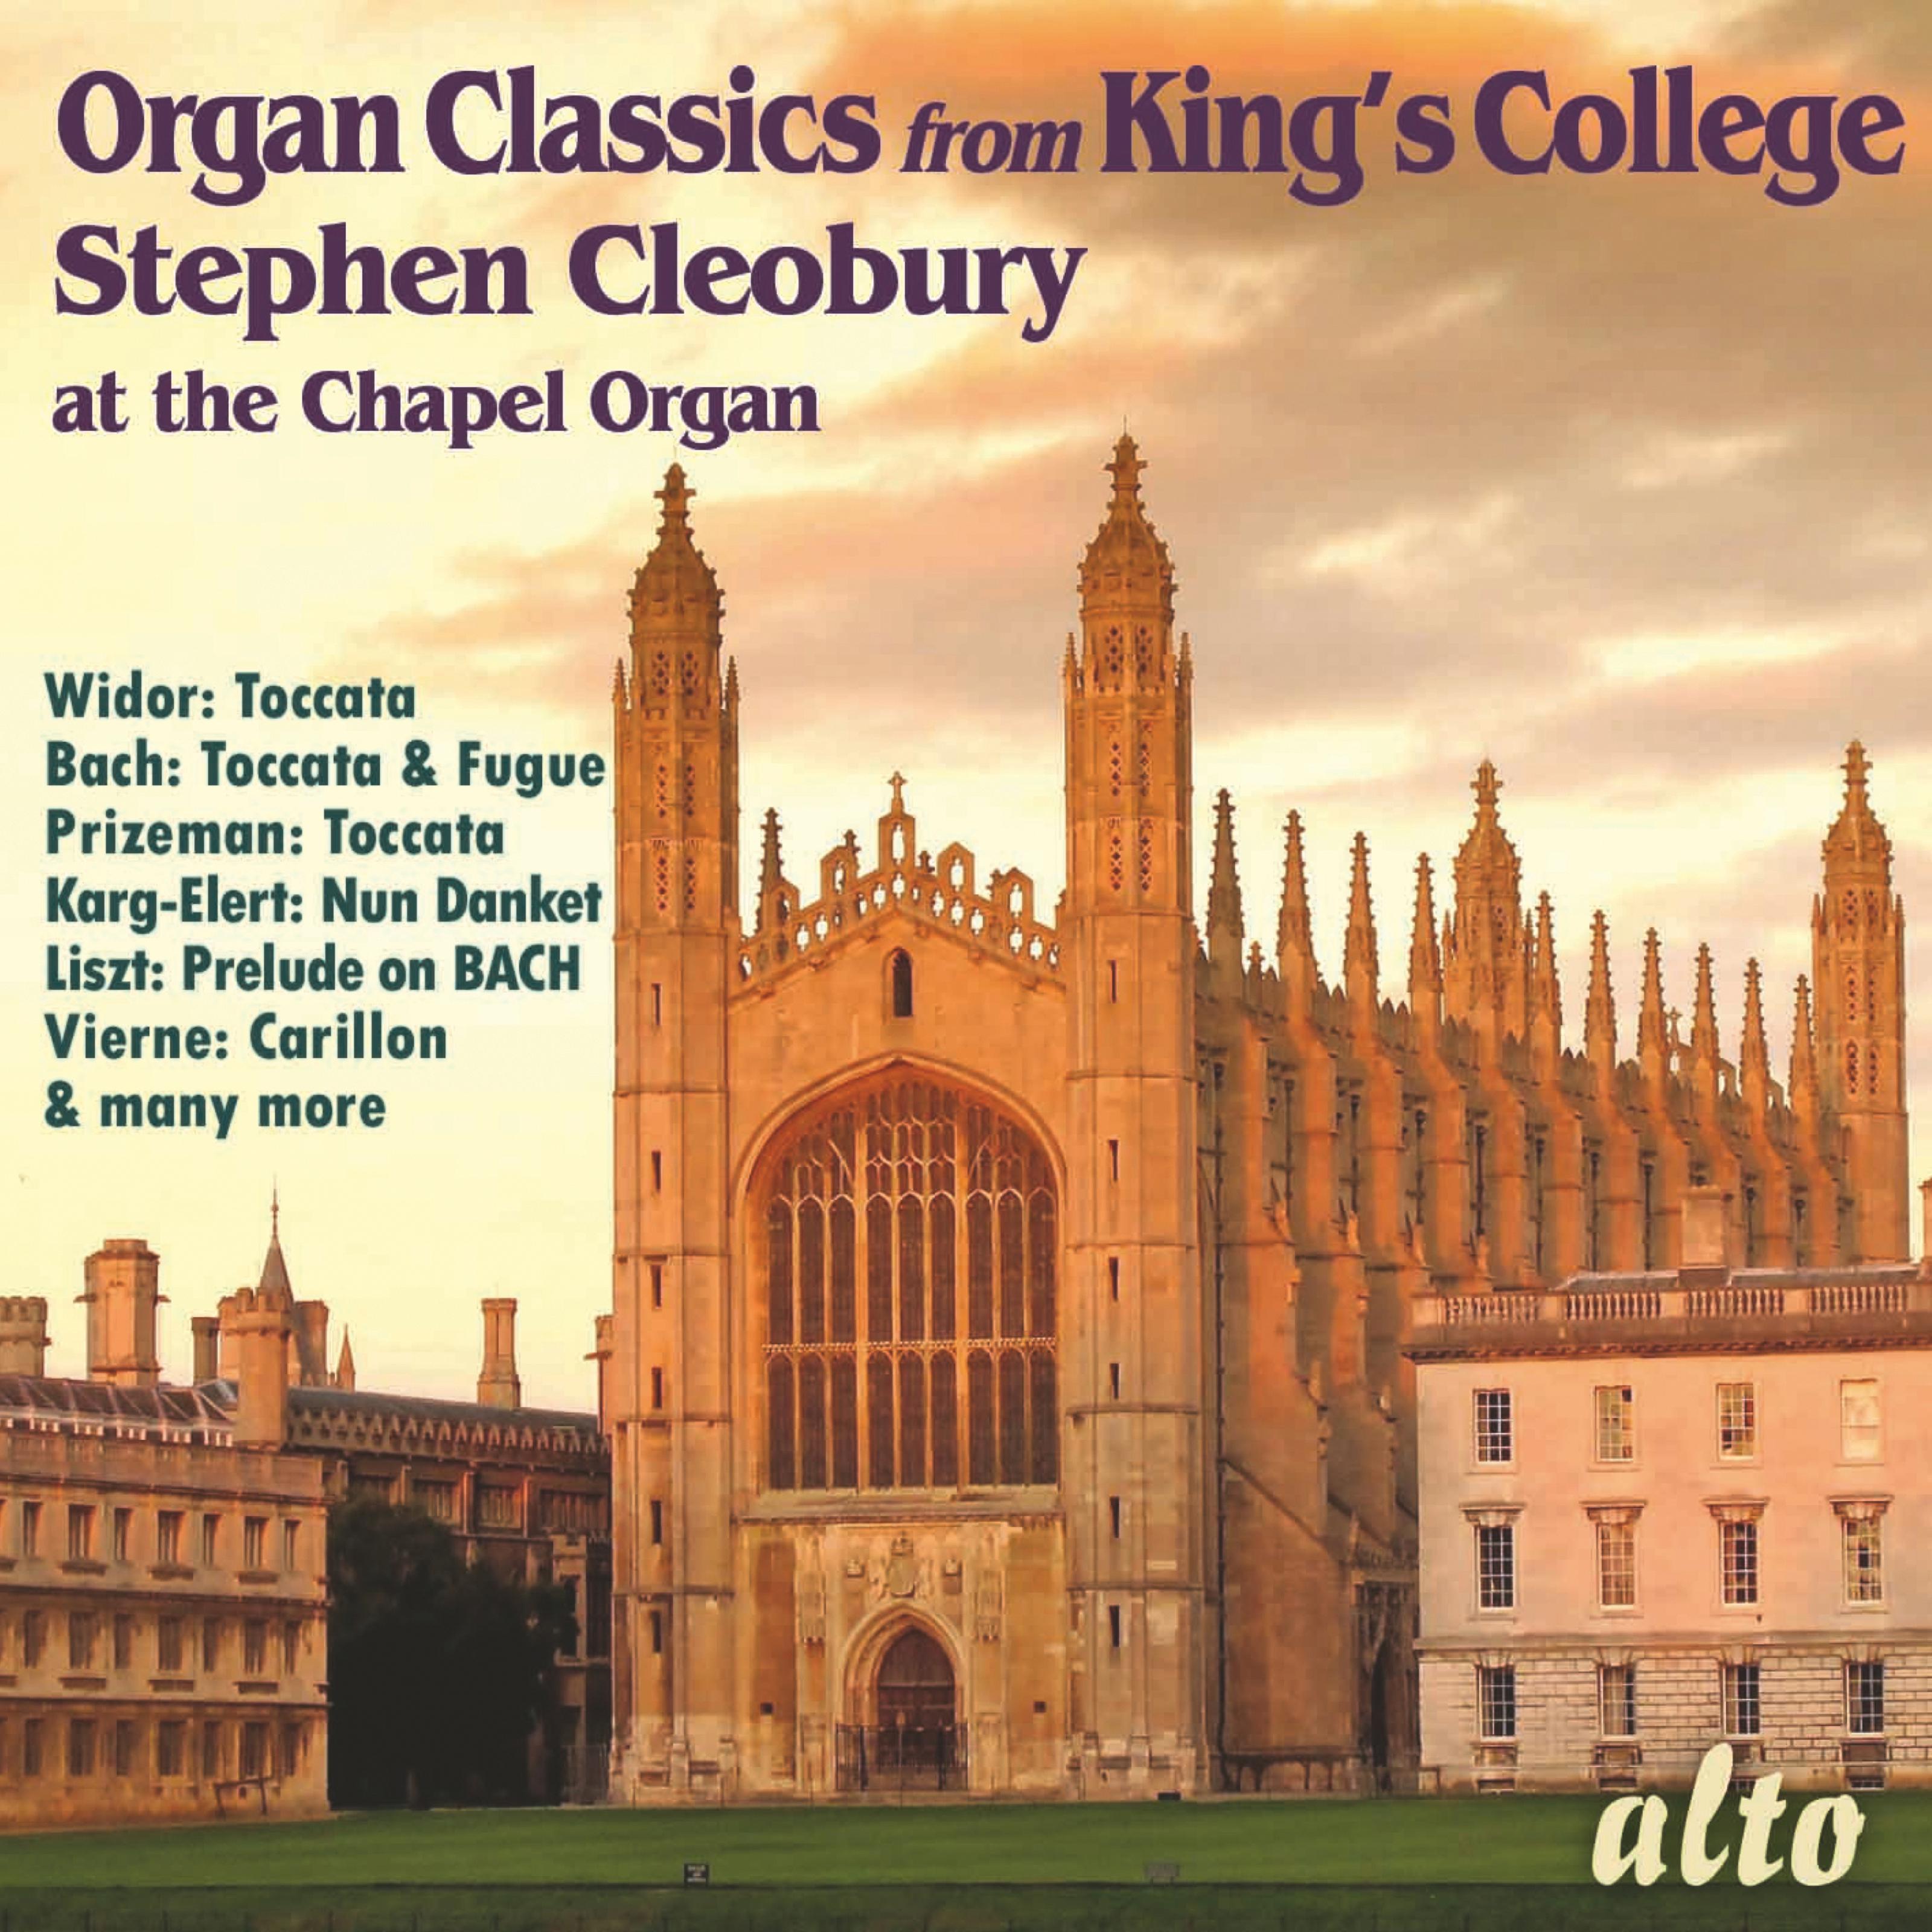 Organ Classics from King's College